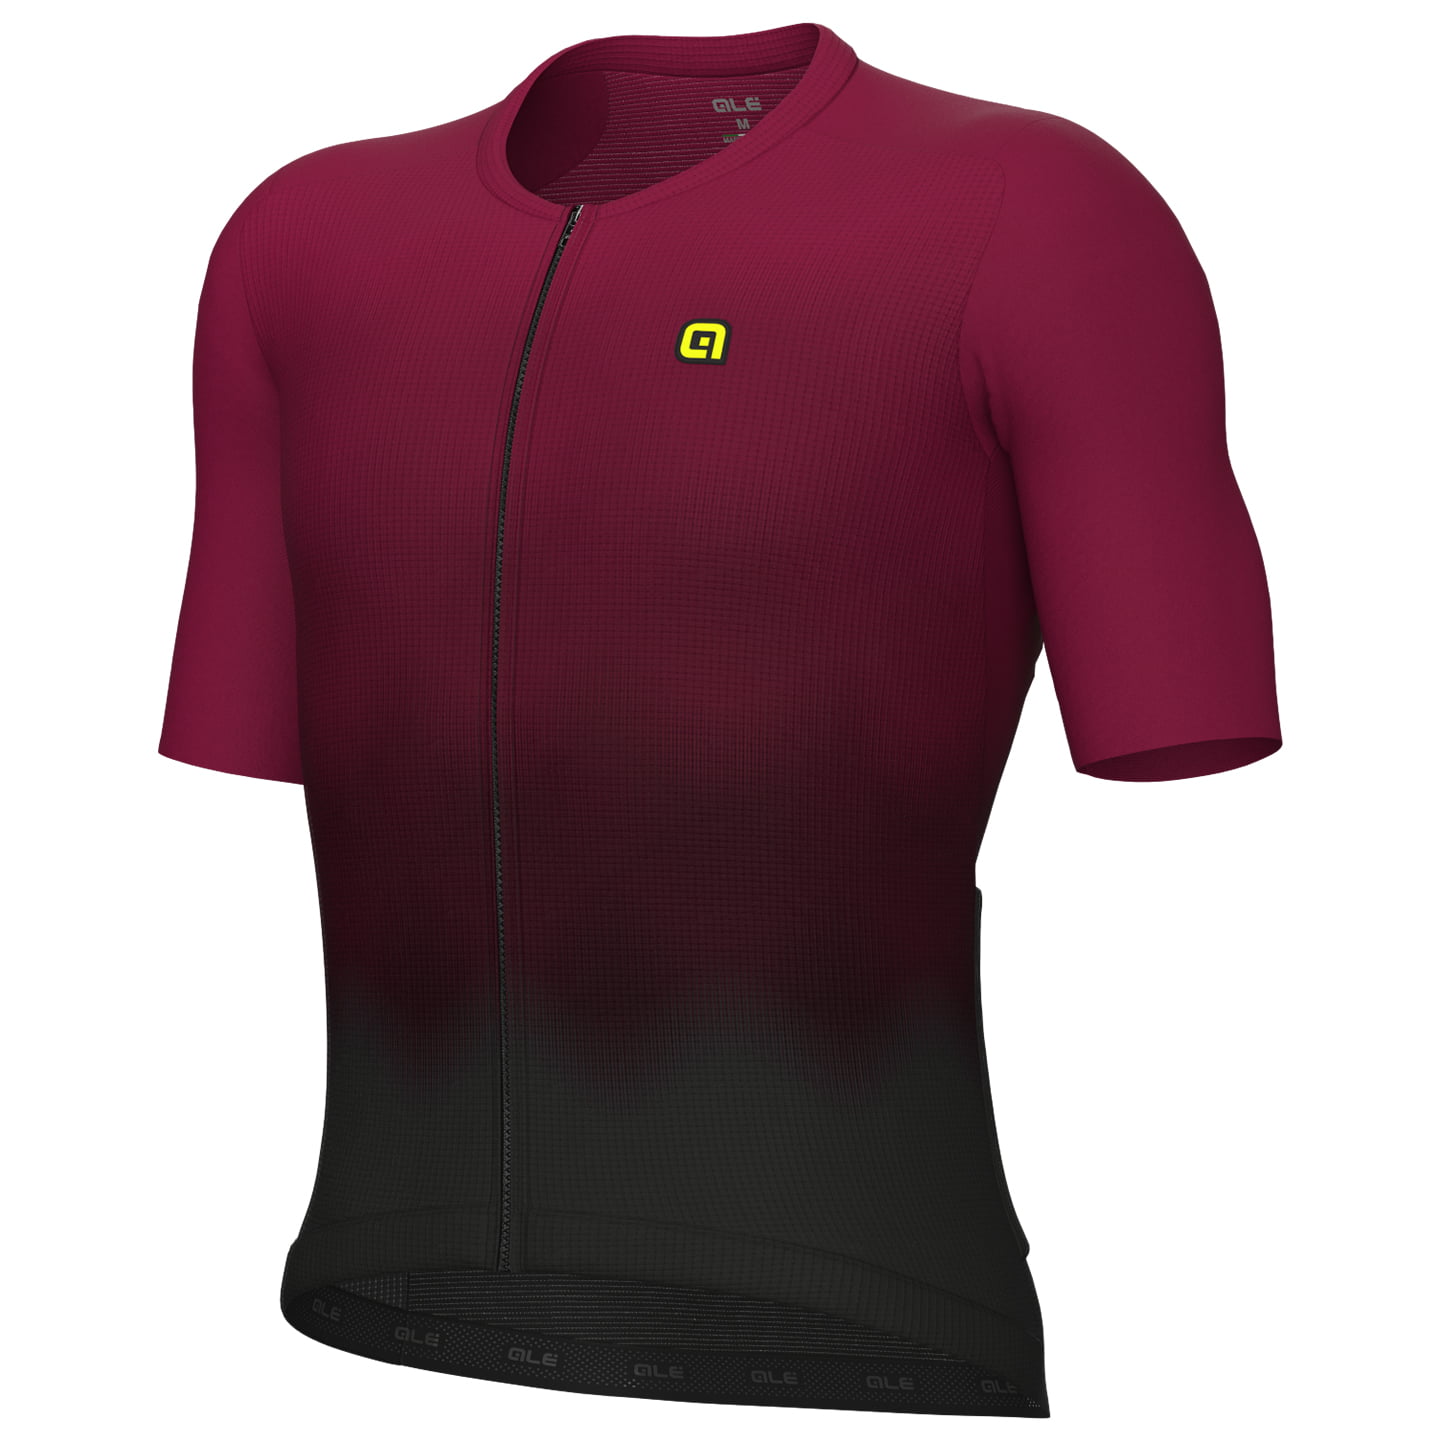 ALE Velocity 2.0 Short Sleeve Jersey, for men, size L, Cycling jersey, Cycling clothing